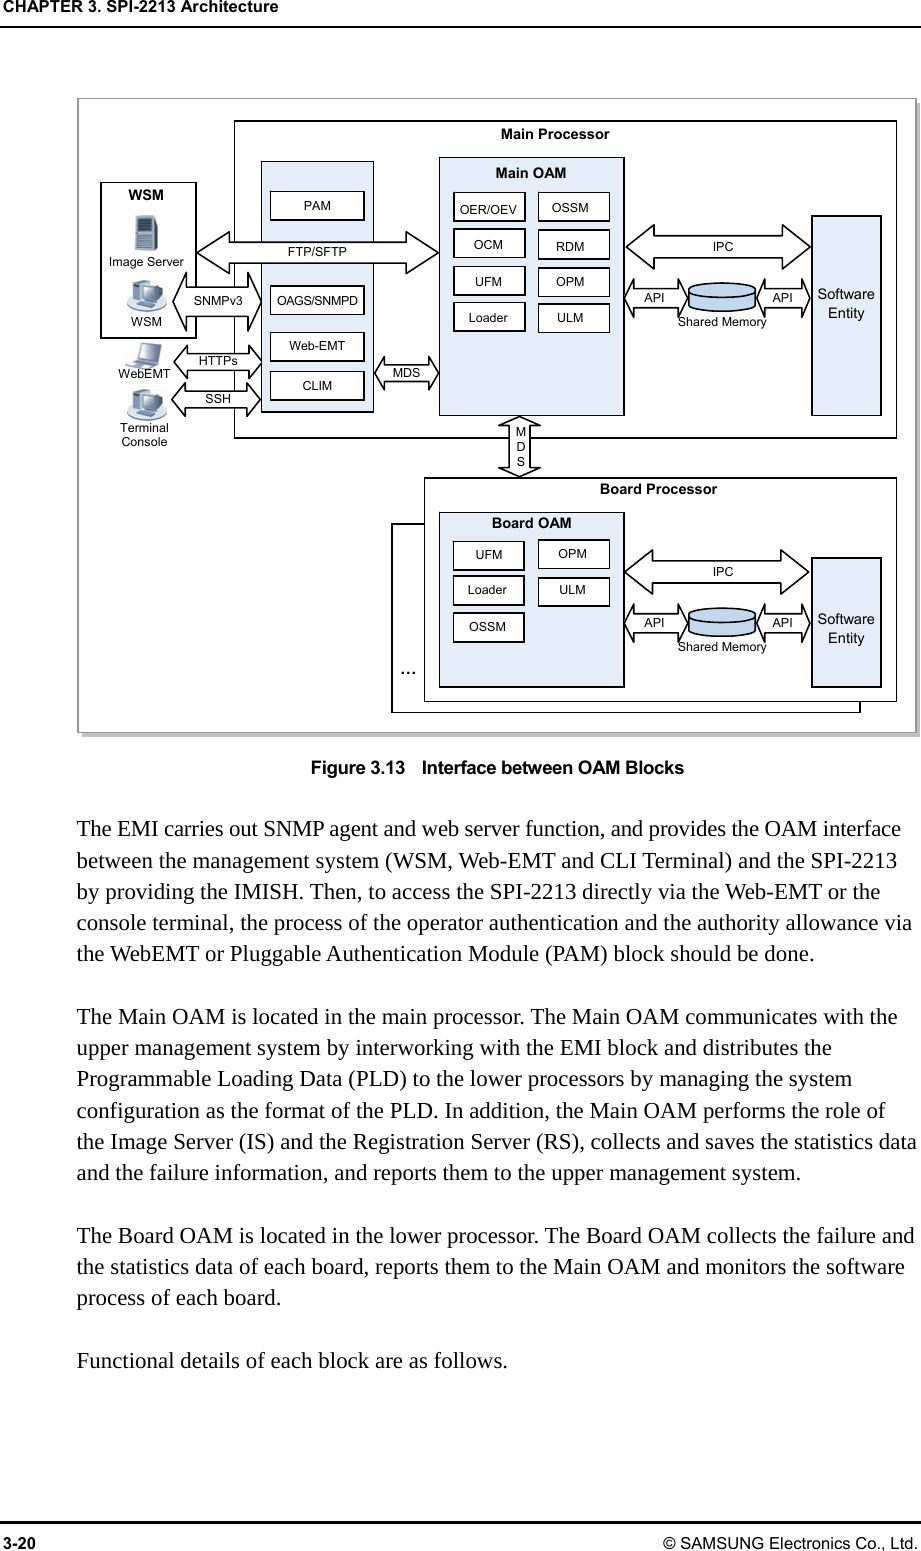 CHAPTER 3. SPI-2213 Architecture 3-20 © SAMSUNG Electronics Co., Ltd.  Figure 3.13    Interface between OAM Blocks  The EMI carries out SNMP agent and web server function, and provides the OAM interface between the management system (WSM, Web-EMT and CLI Terminal) and the SPI-2213 by providing the IMISH. Then, to access the SPI-2213 directly via the Web-EMT or the console terminal, the process of the operator authentication and the authority allowance via the WebEMT or Pluggable Authentication Module (PAM) block should be done.  The Main OAM is located in the main processor. The Main OAM communicates with the upper management system by interworking with the EMI block and distributes the Programmable Loading Data (PLD) to the lower processors by managing the system configuration as the format of the PLD. In addition, the Main OAM performs the role of the Image Server (IS) and the Registration Server (RS), collects and saves the statistics data and the failure information, and reports them to the upper management system.  The Board OAM is located in the lower processor. The Board OAM collects the failure and the statistics data of each board, reports them to the Main OAM and monitors the software process of each board.  Functional details of each block are as follows. OPMUFMMain ProcessorMain OAM IPC API APIShared Memory Web-EMT WSM Image Server WSMFTP/SFTP SNMPv3 Board OAM Loader ULMOSSMBoard Processor…HTTPsSSHTerminal Console CLIMMDSOAGS/SNMPD WebEMT Software Entity PAM UFMLoaderOER/OEVOCM OPM ULM OSSMRDMMDSIPC API APIShared Memory Software Entity 